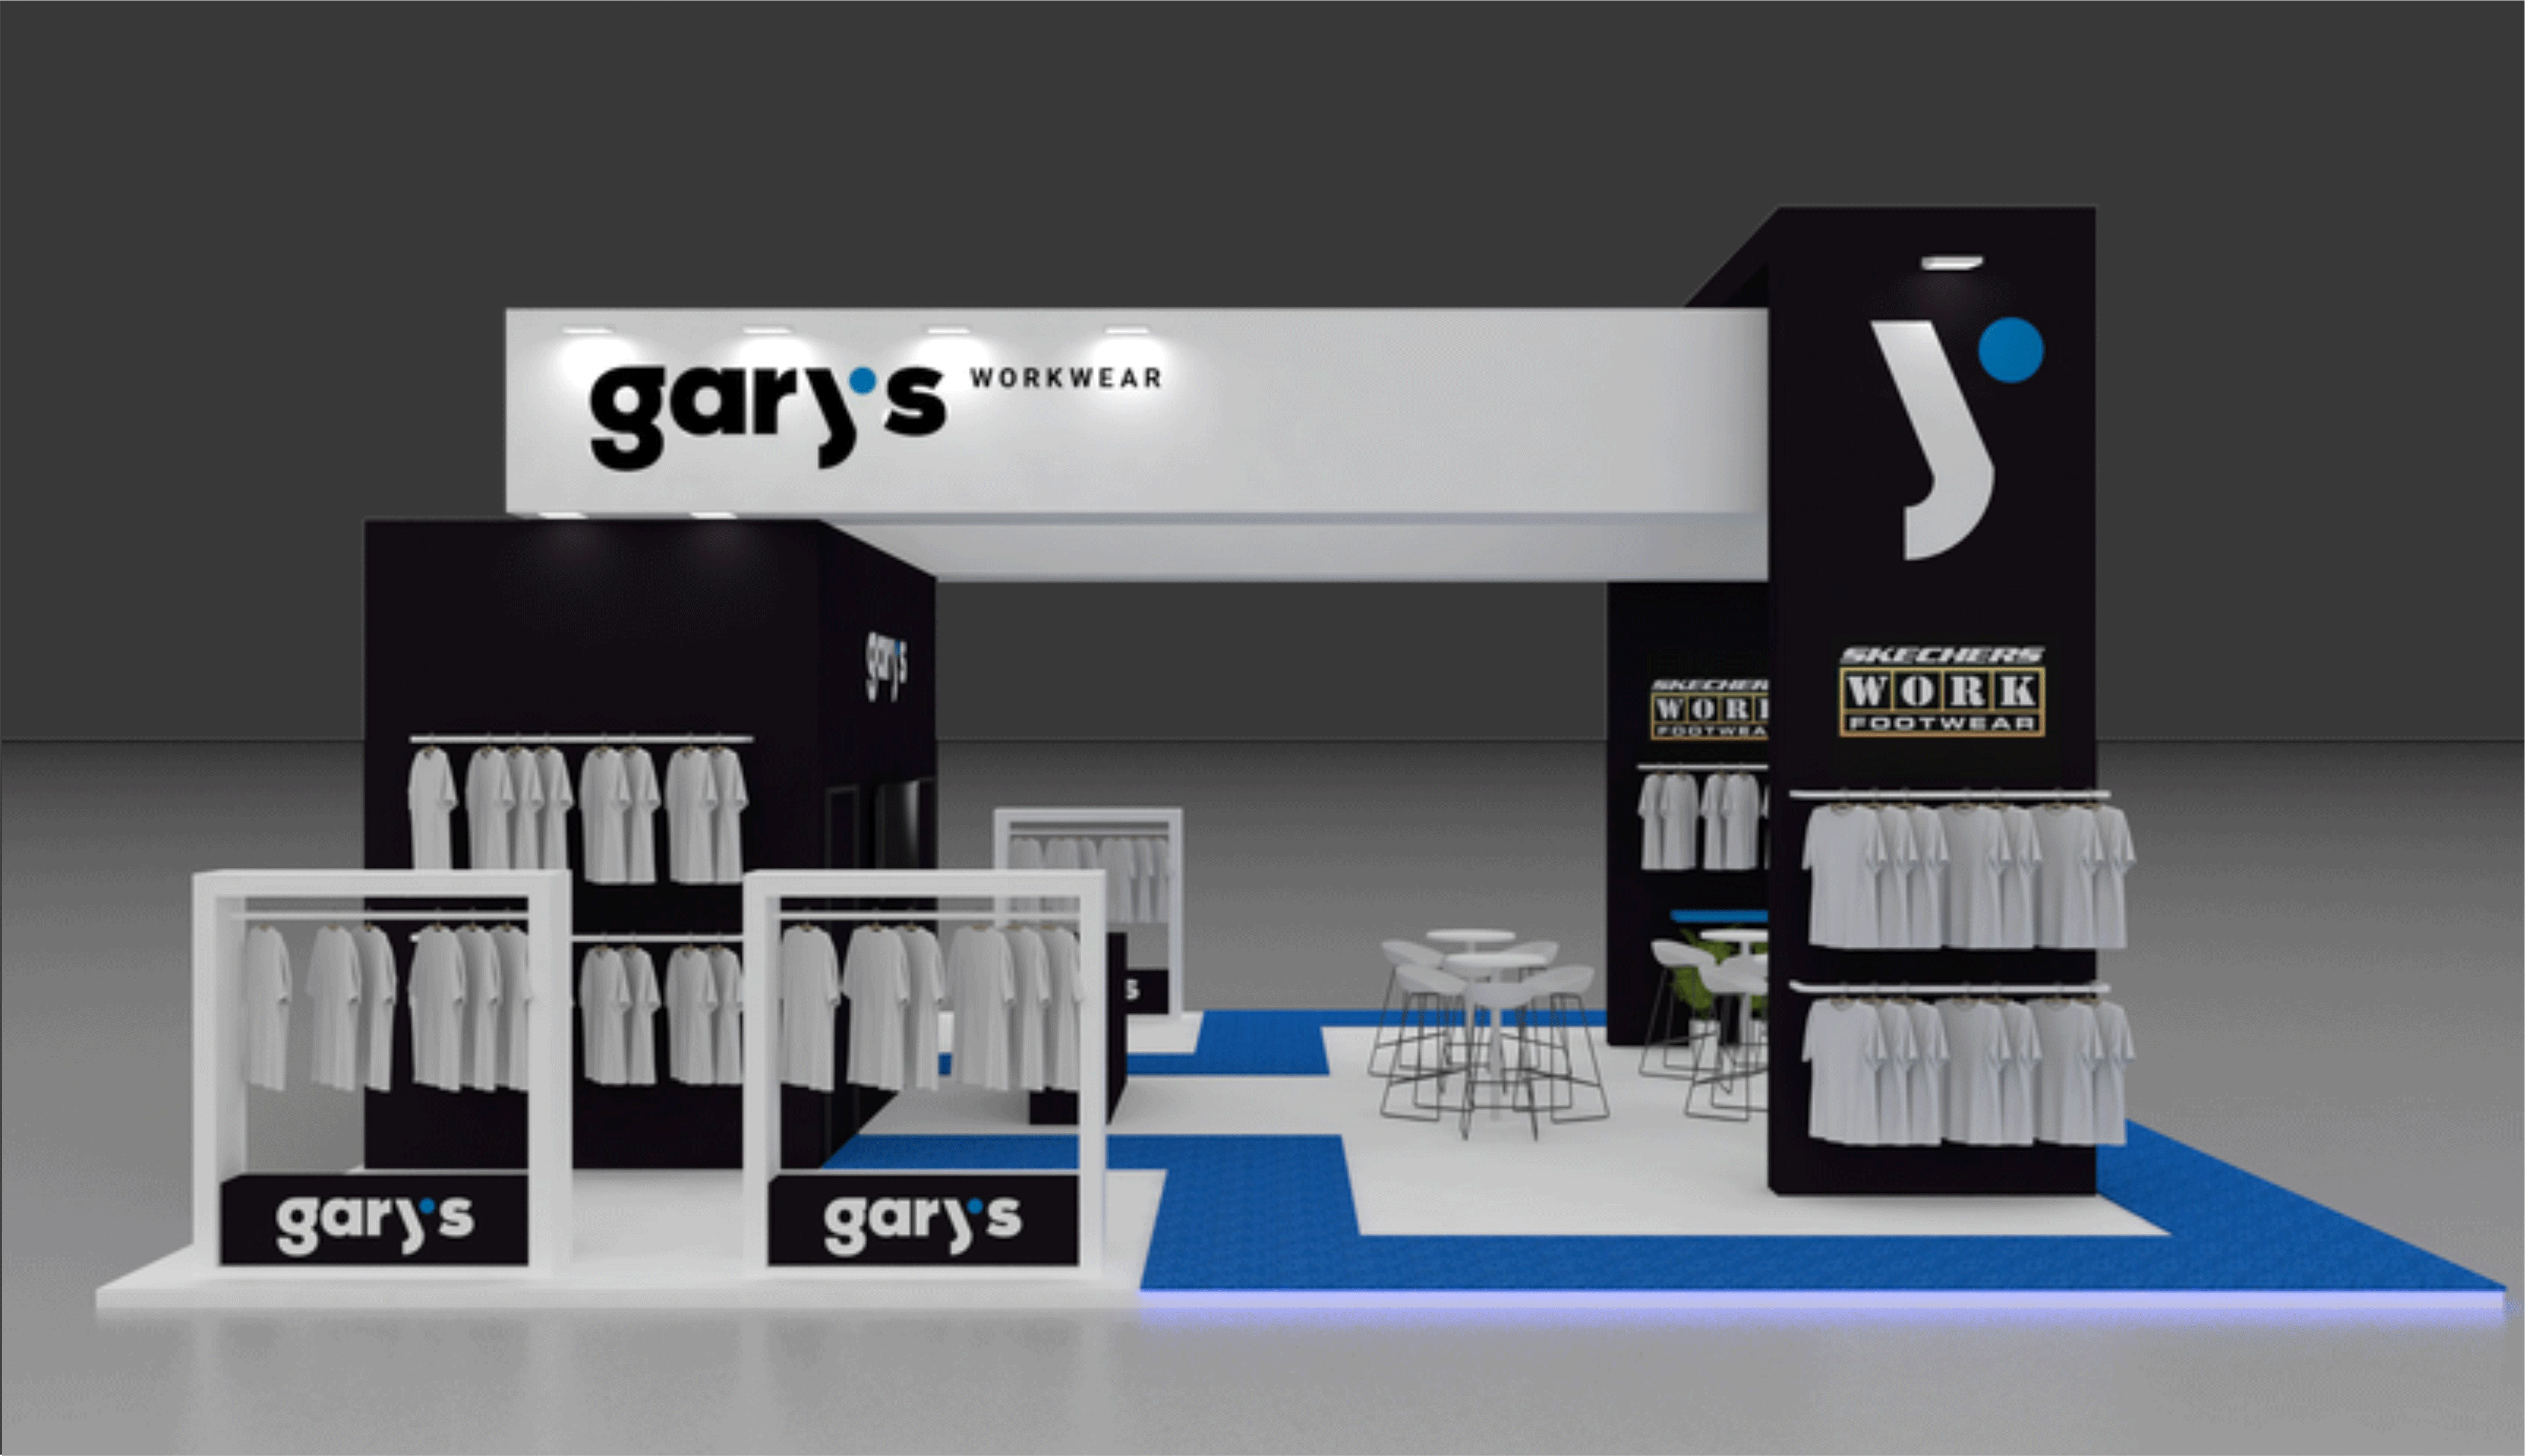 Lire tout le message: GARY'S WORKWEAR IN SICUR 2024